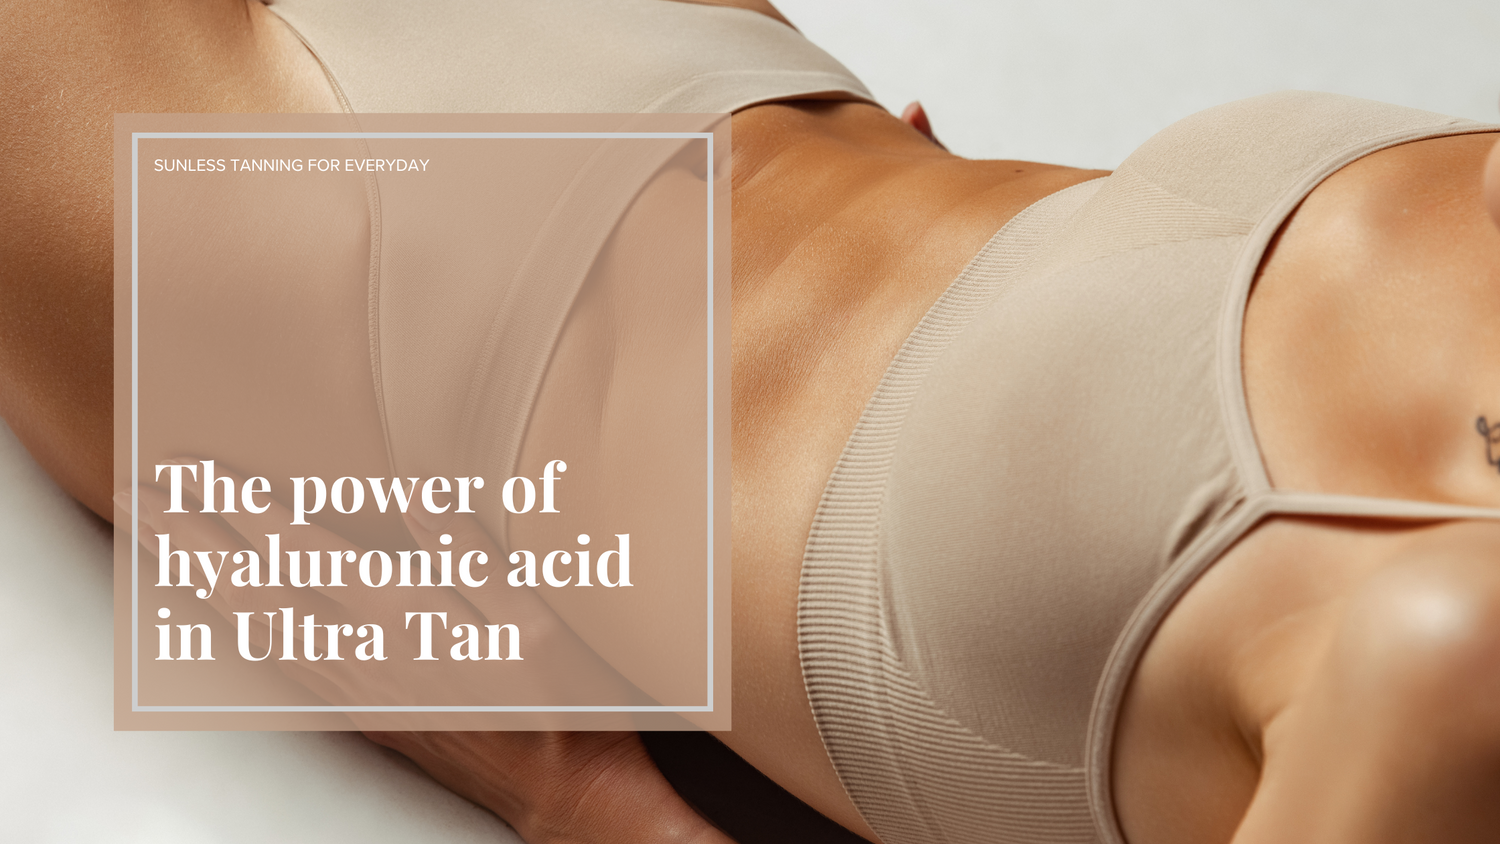 The Power of Hyaluronic Acid in summerbrons. Ultra Tan Tanning Mousse